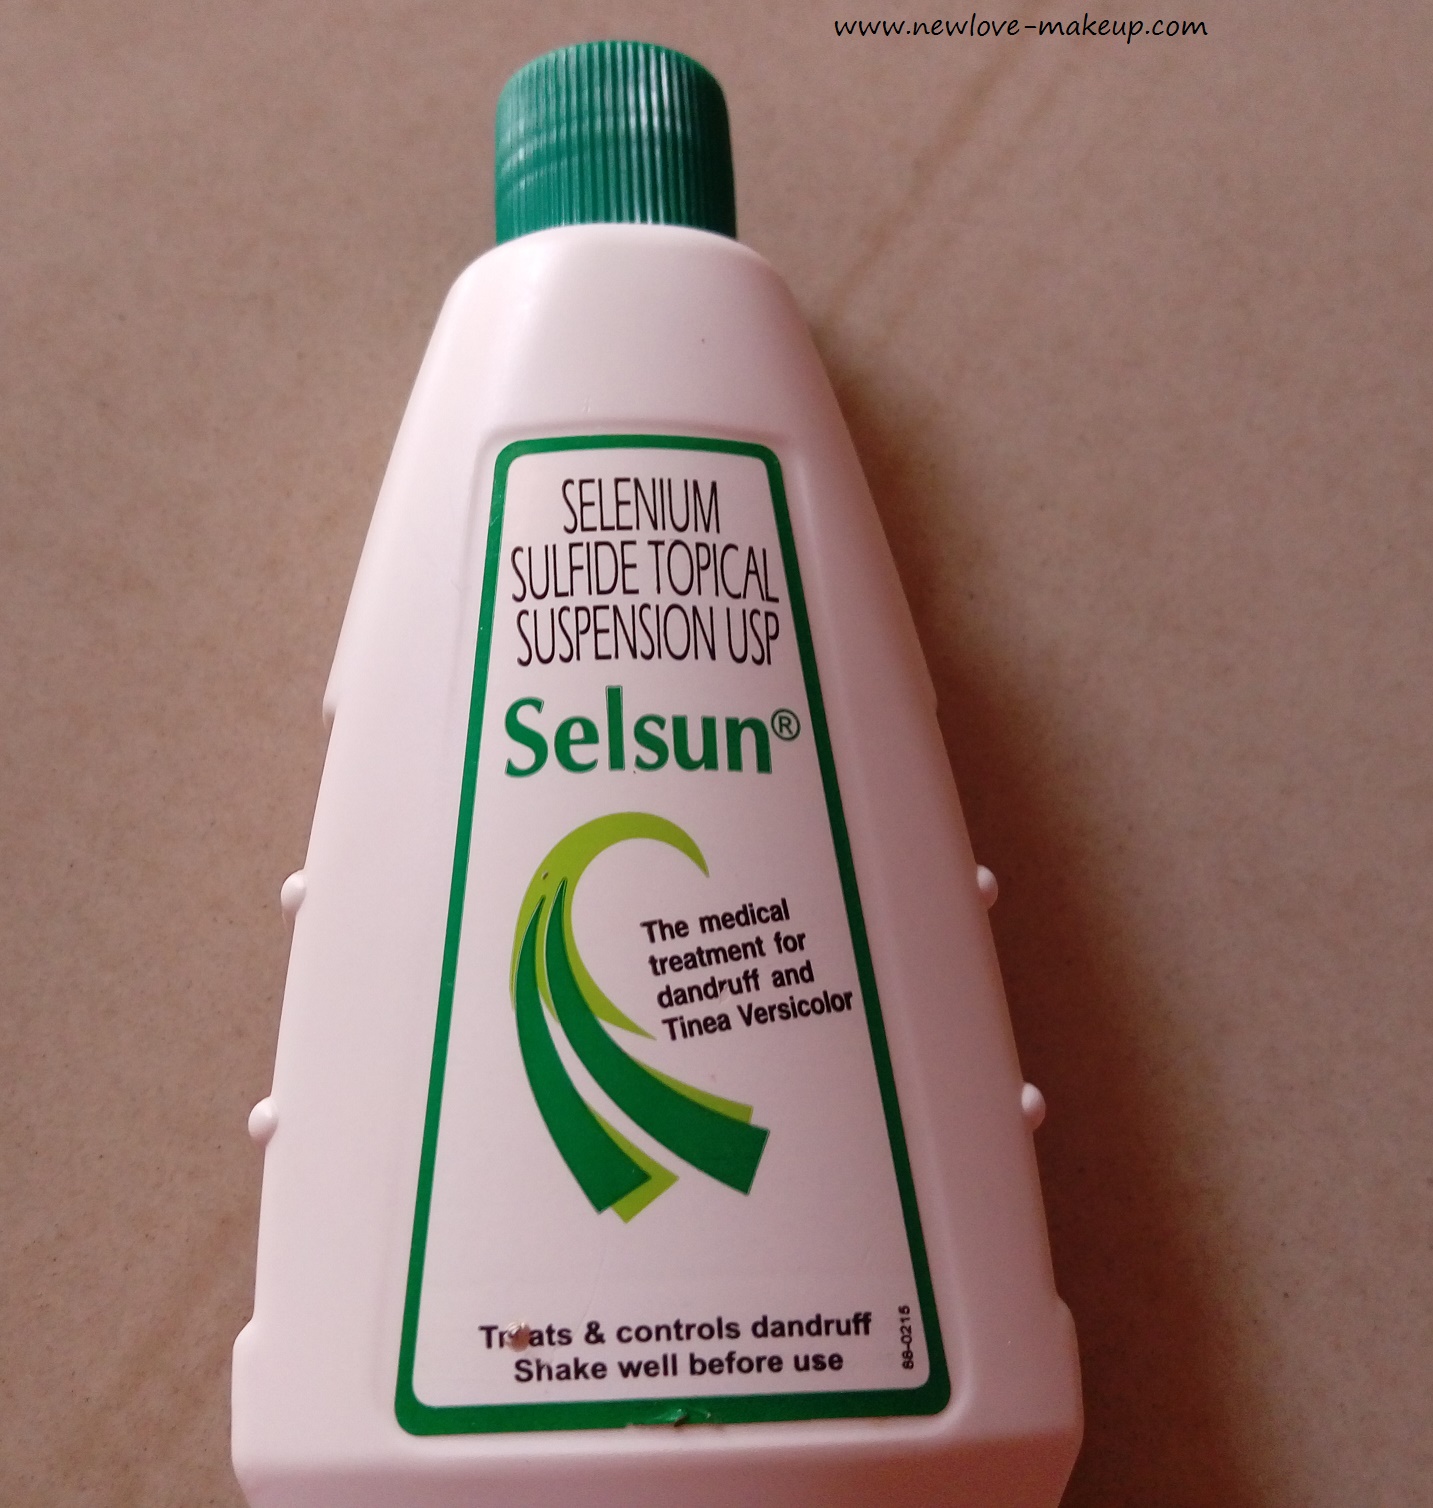 Selsun Selenium Sulfide Topical Suspension Shampoo Review - New Love -  Makeup